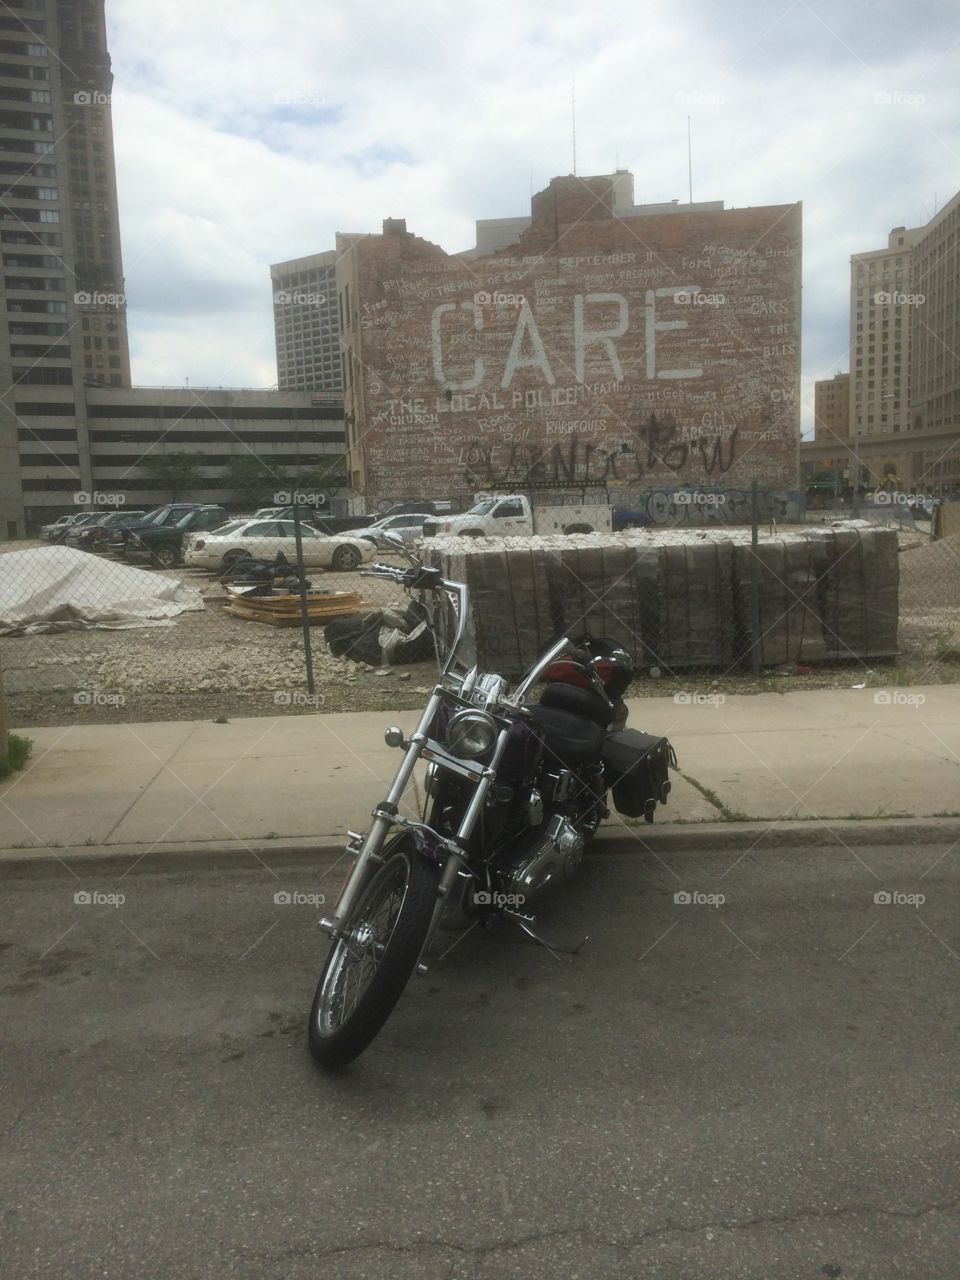 Motorcycle downtown Detroit in front of a wall that seemed like it would be there forever
